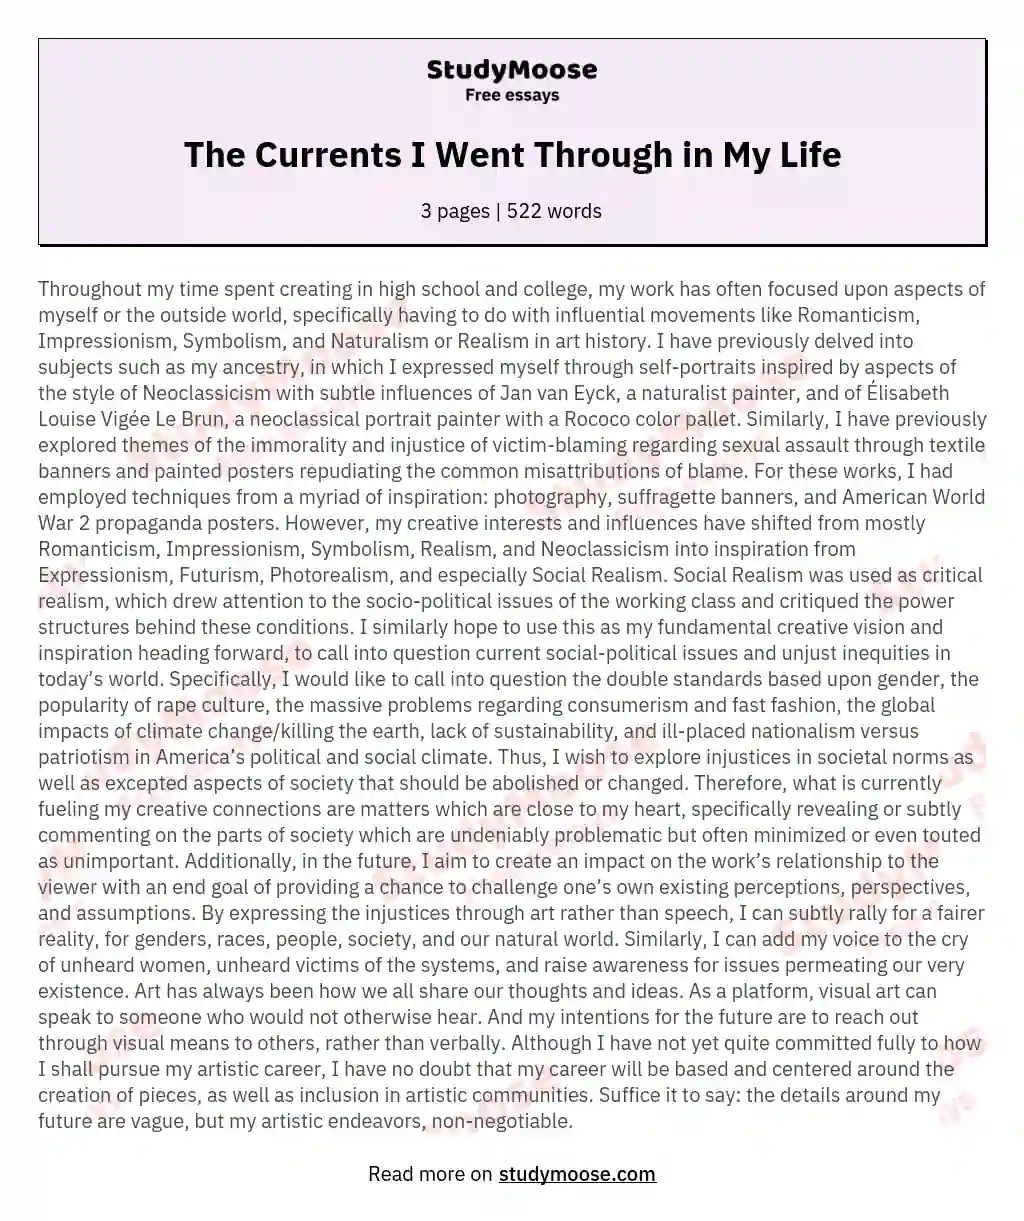 The Currents I Went Through in My Life essay